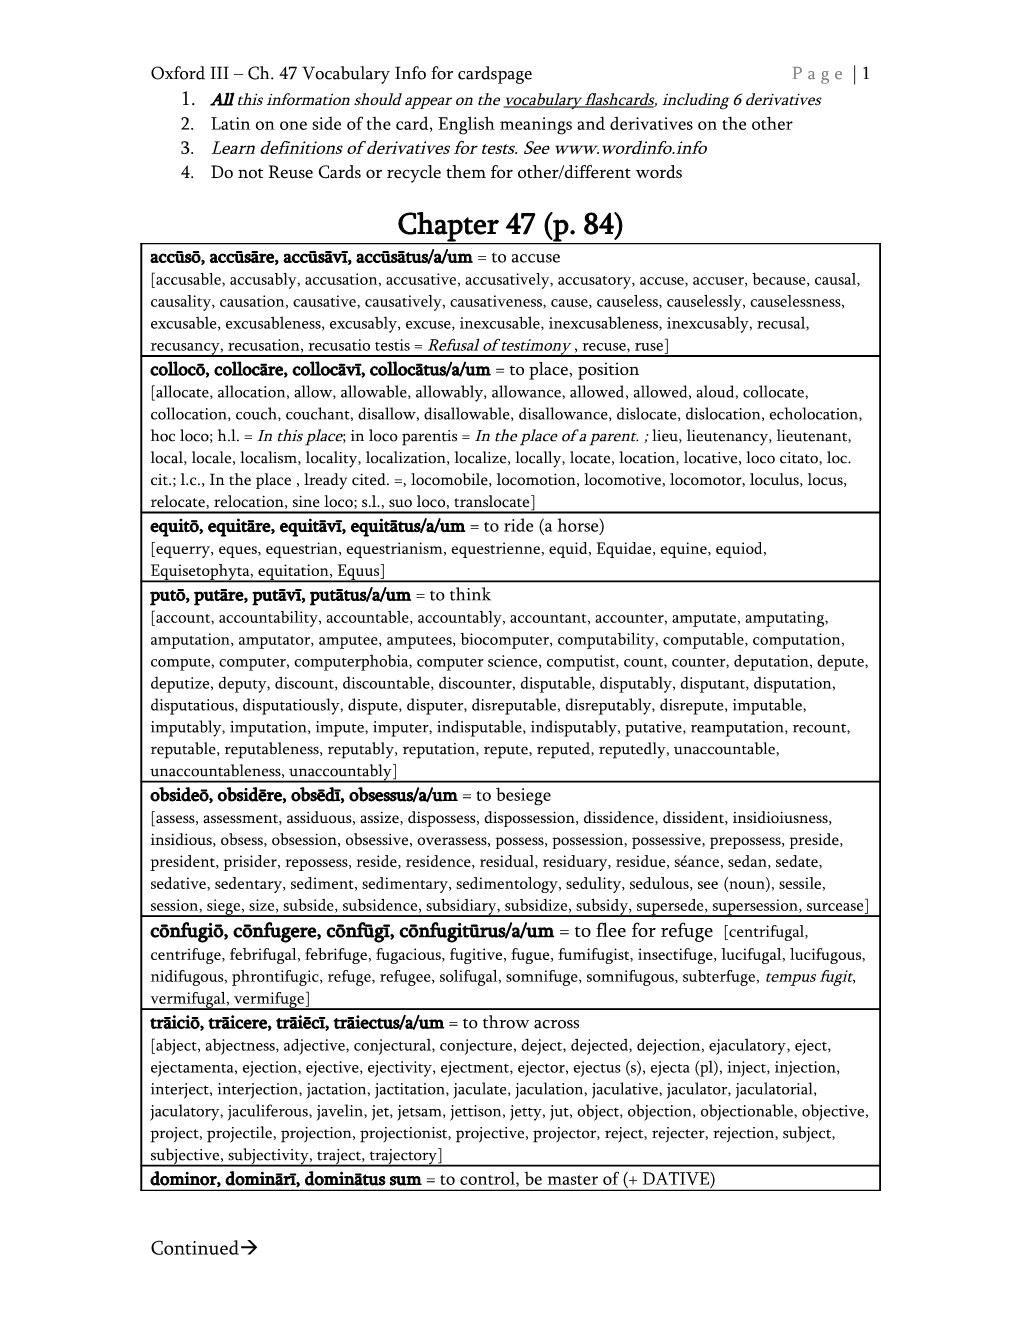 Oxford III Ch. 47 Vocabulary Info for Cards Page Page 4